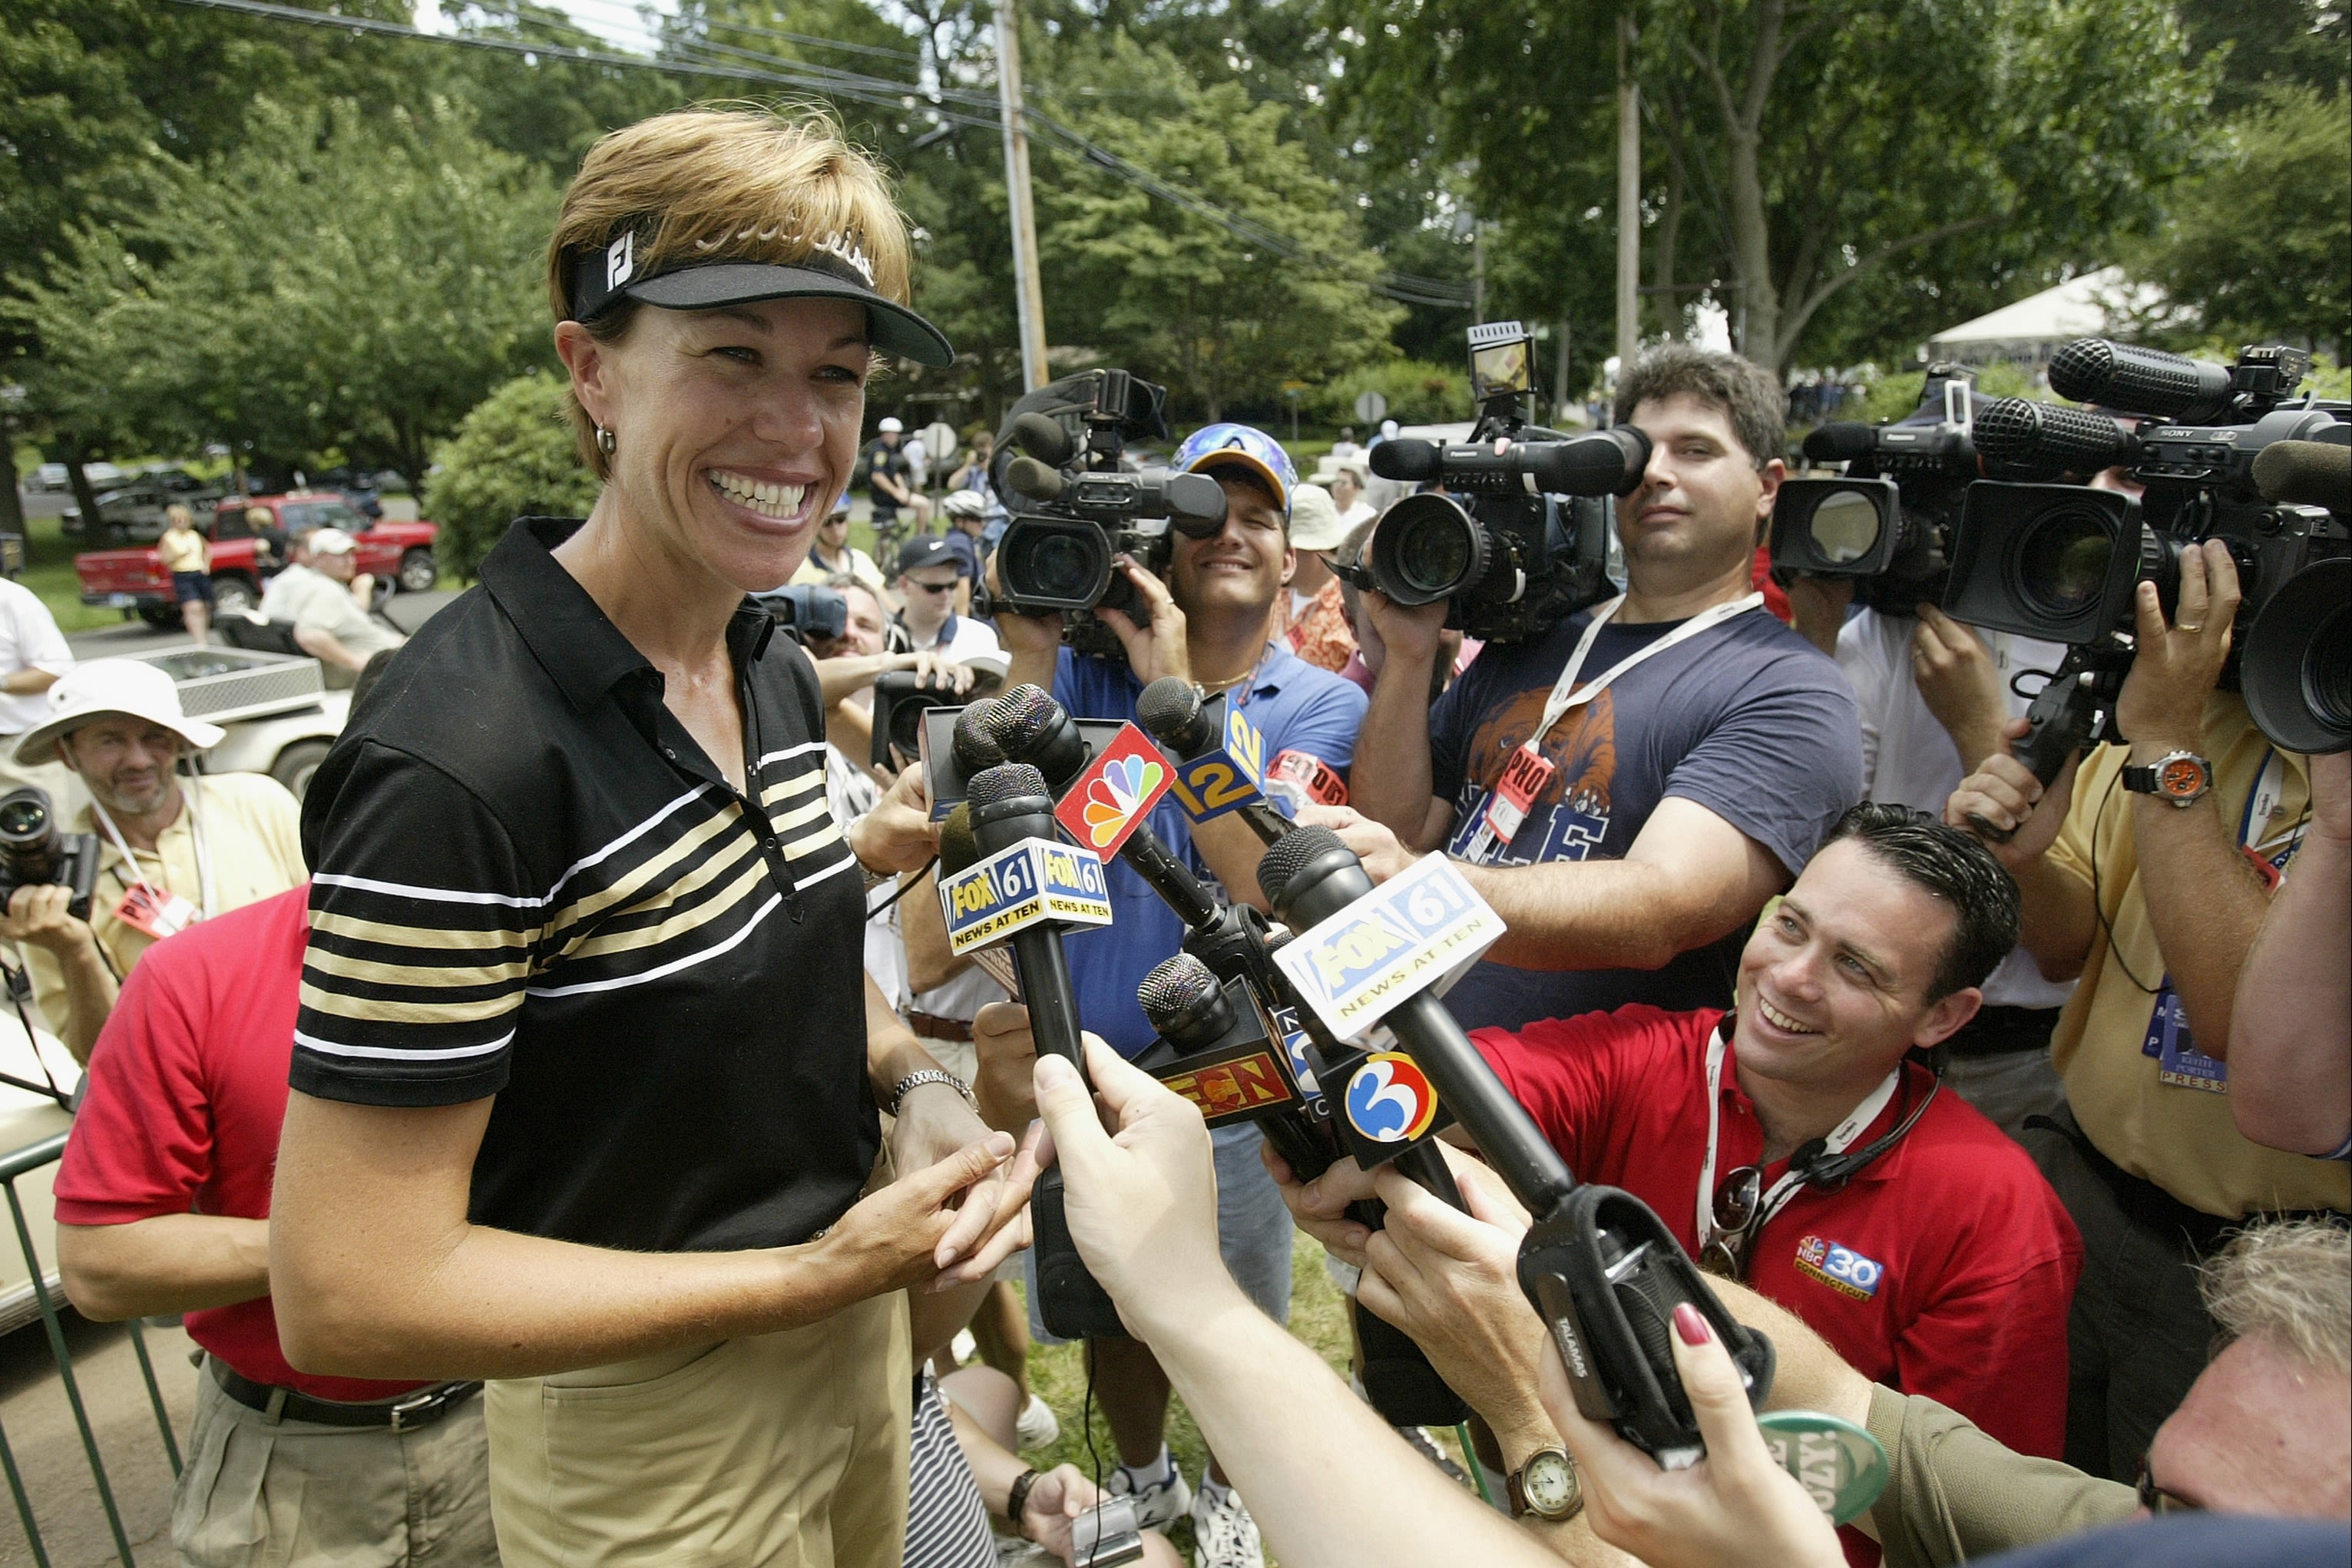 Whaley at the 2003 Greater Hartford Open. (Getty Images)